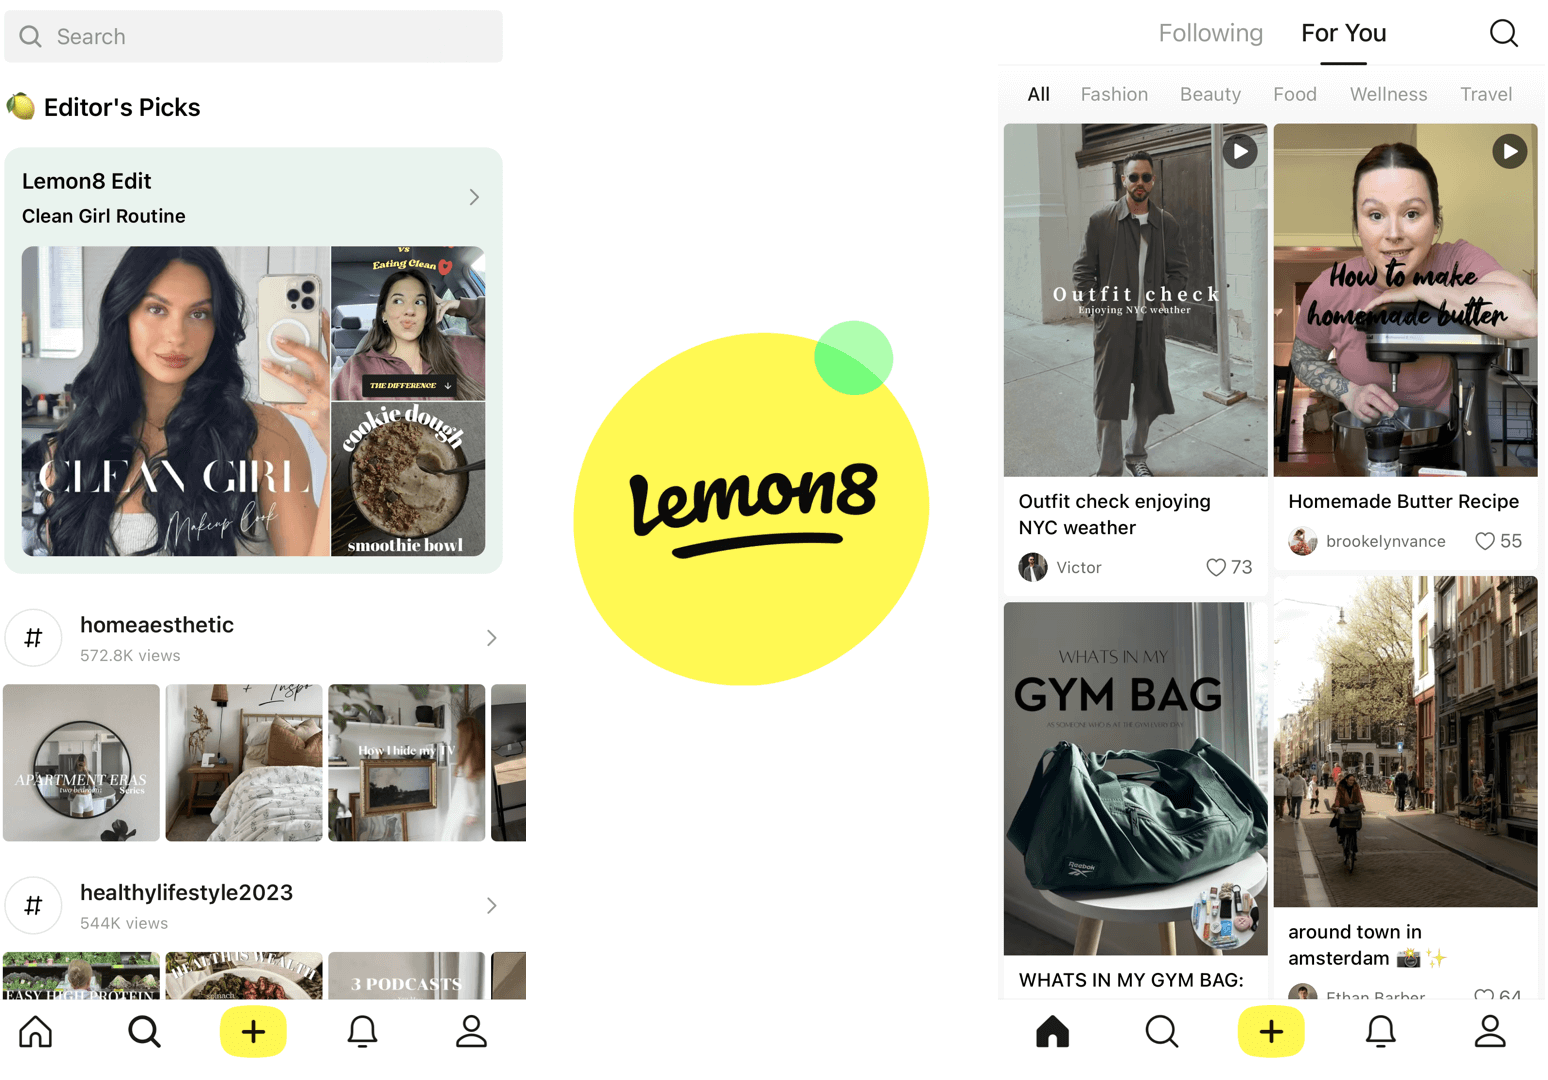 Lemon8 is "THE destination for sharing and exploring." Users make posts, collections and find the latest trends. But is it safe?